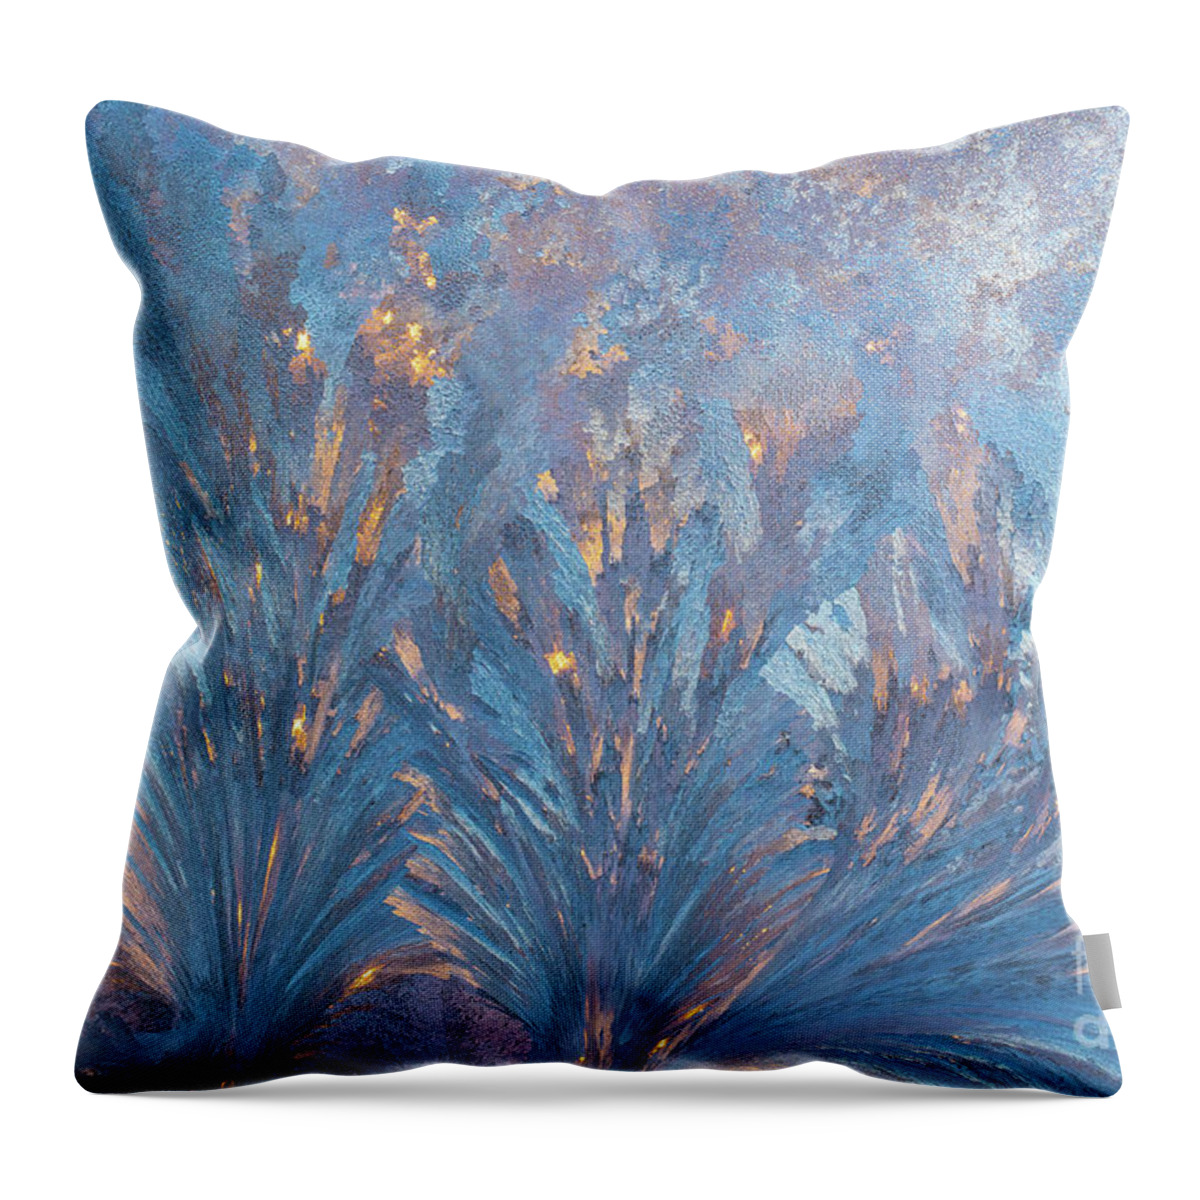 Cheryl Baxter Photography Throw Pillow featuring the photograph Window Frost At Sunset by Cheryl Baxter